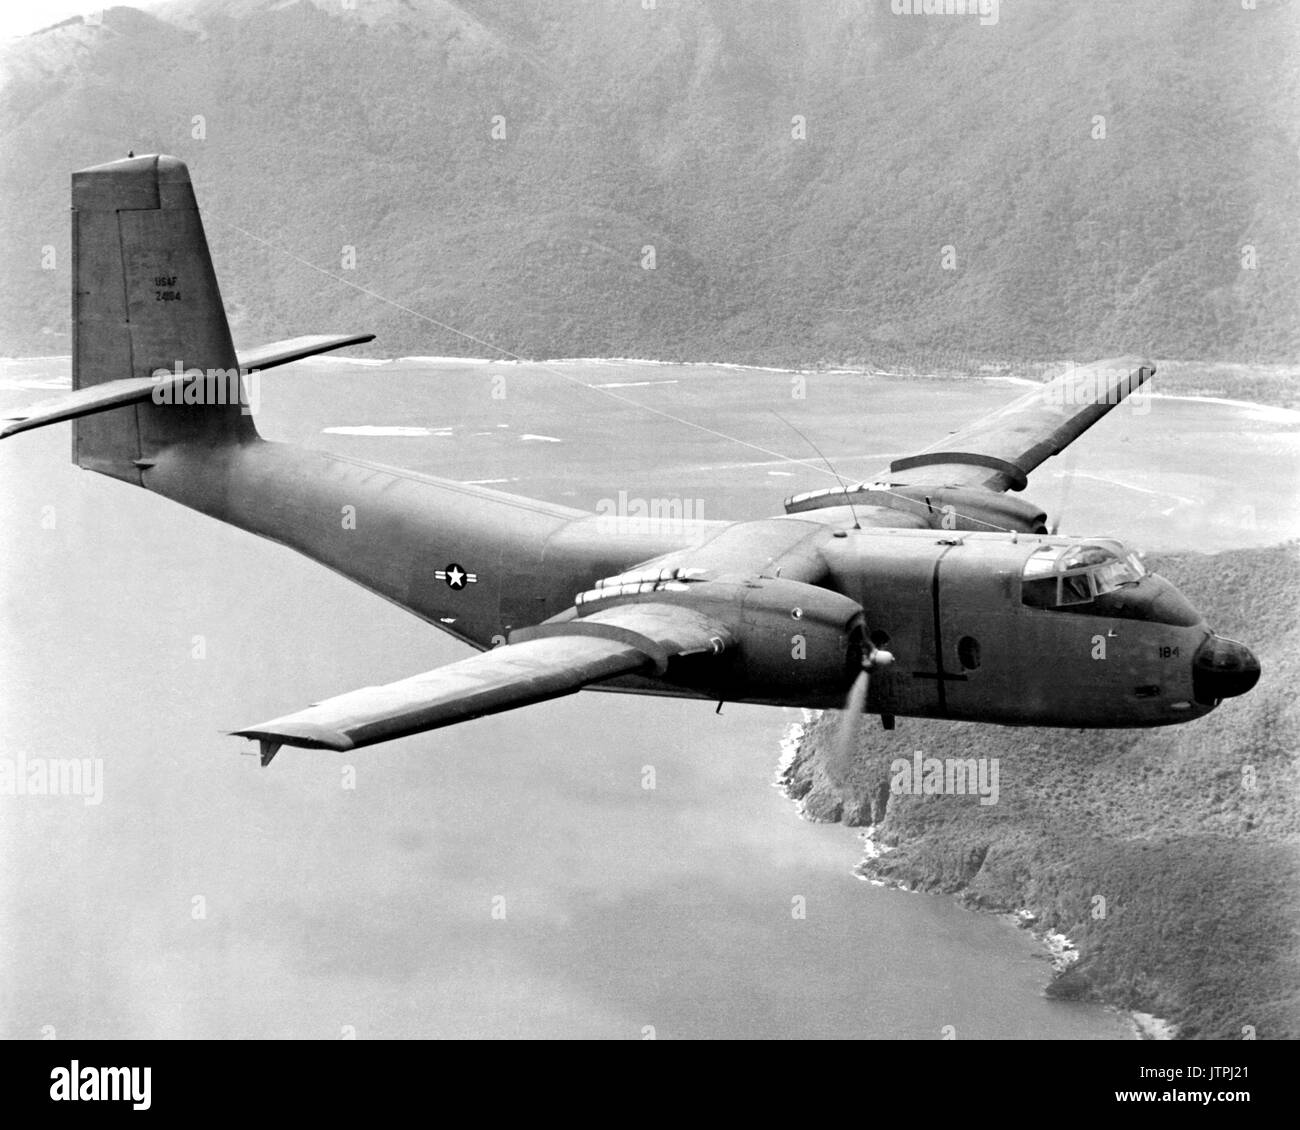 A C-7 Caribou aircraft, transferred from the U.S. Army to the Air Force on Jan. 1, is used for airlifting supplies to forward outposts in Vietnam.  With a maximum payload of three tons, the C-7A can take off and clear a 50-foot obstacle in about 1,200 feet.  The aircraft, used for landing at short, unimproved airfields, can land on a 1,000-foot runway. Stock Photo